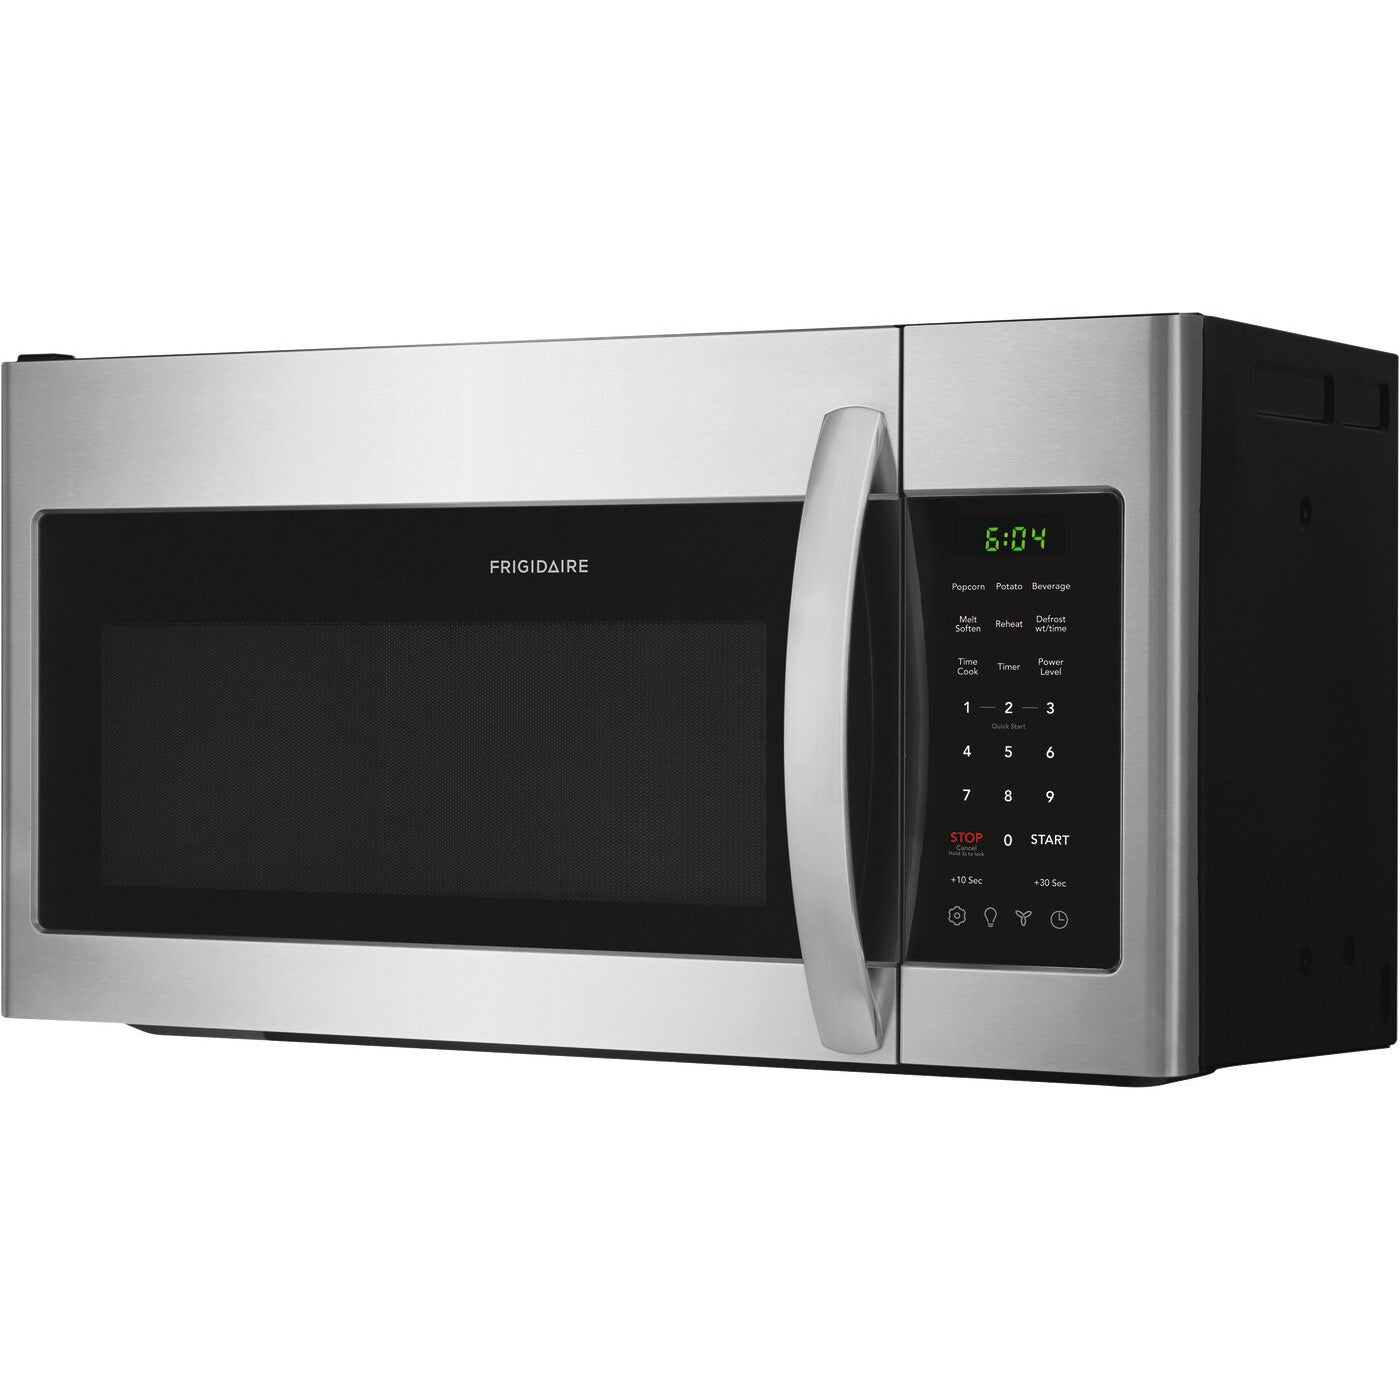 Frigidaire 1.8 Cu. Ft. 1,000 Watt Over-The-Range Microwave Oven with Extra Large Cooking Space